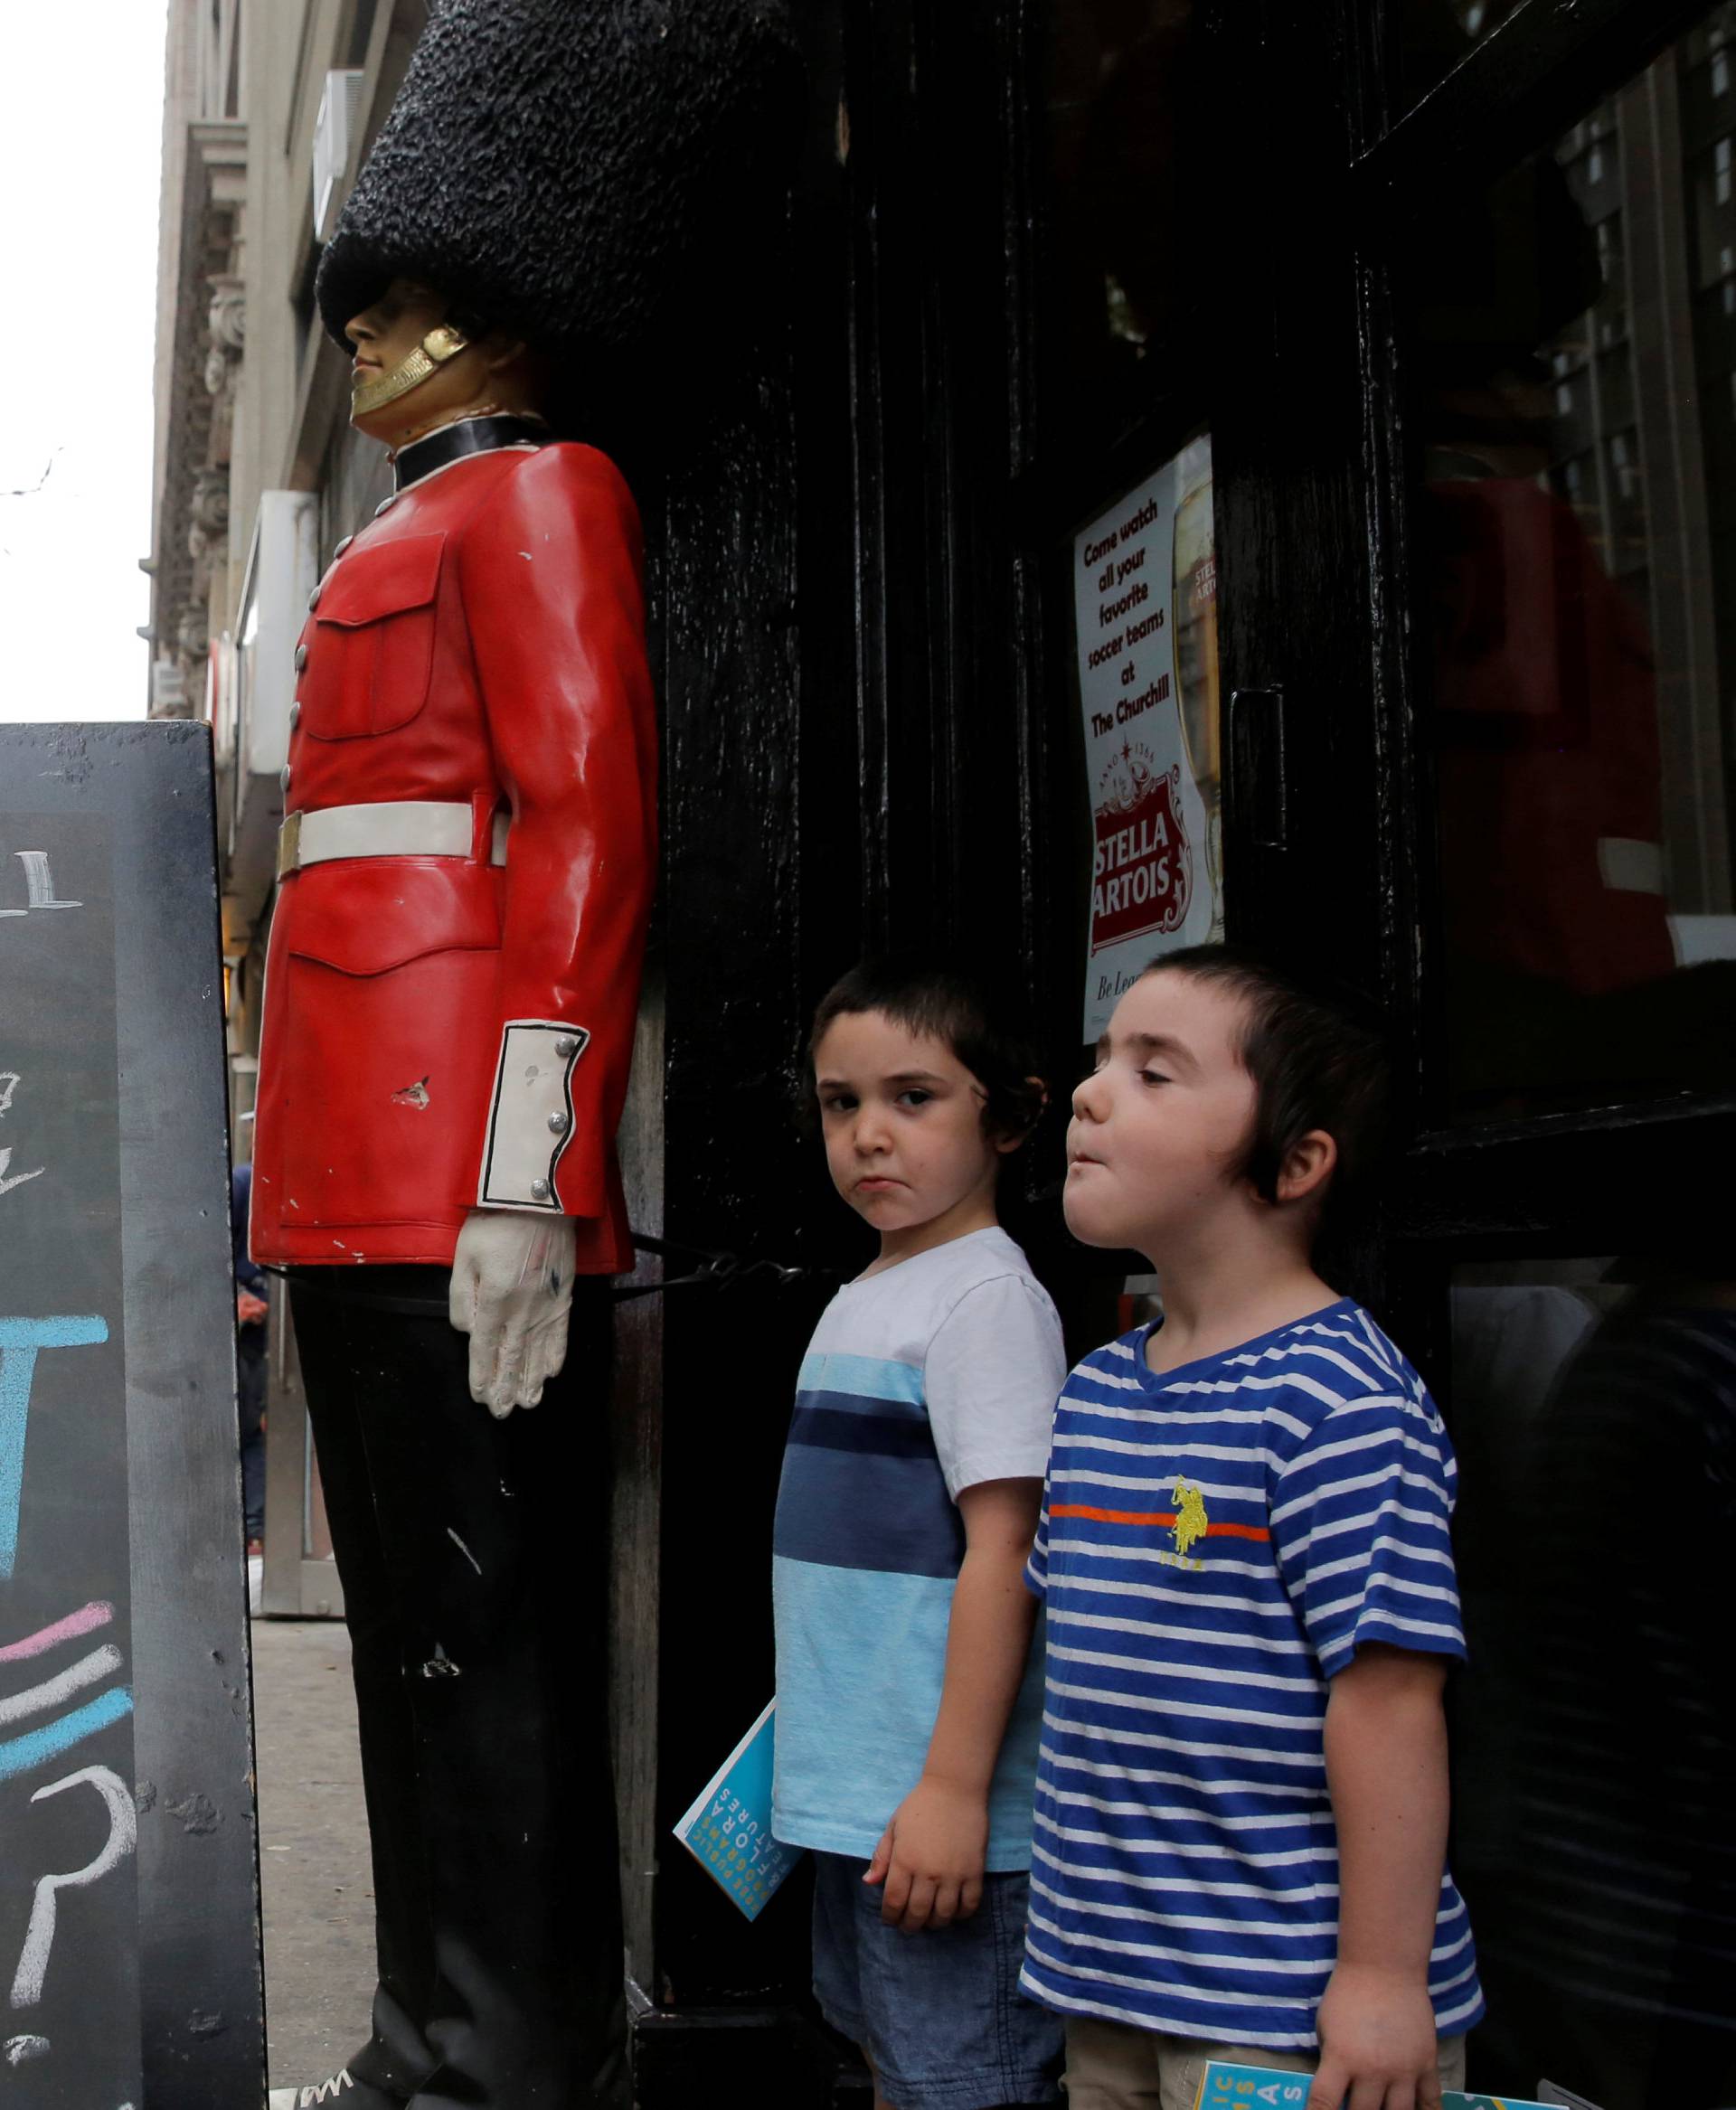 Children pose next to a chalkboard advertising a Brexit viewing event at "The Churchill Tavern", a British theme bar, on the day where Britain votes whether or not to remain in the European Union in the Manhattan borough of New York